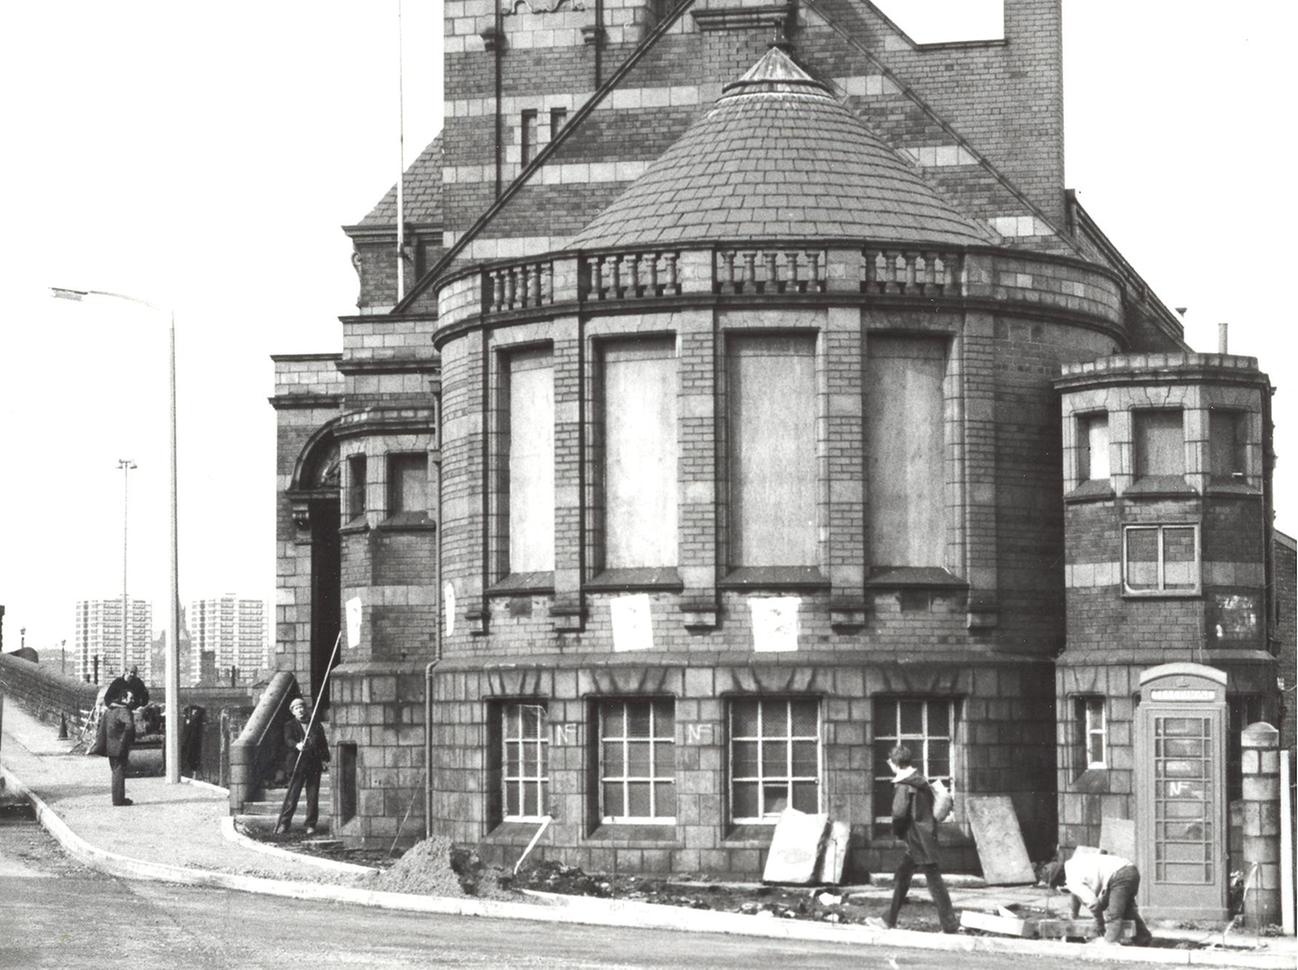 The former Holbeck Library on Minerva Road.